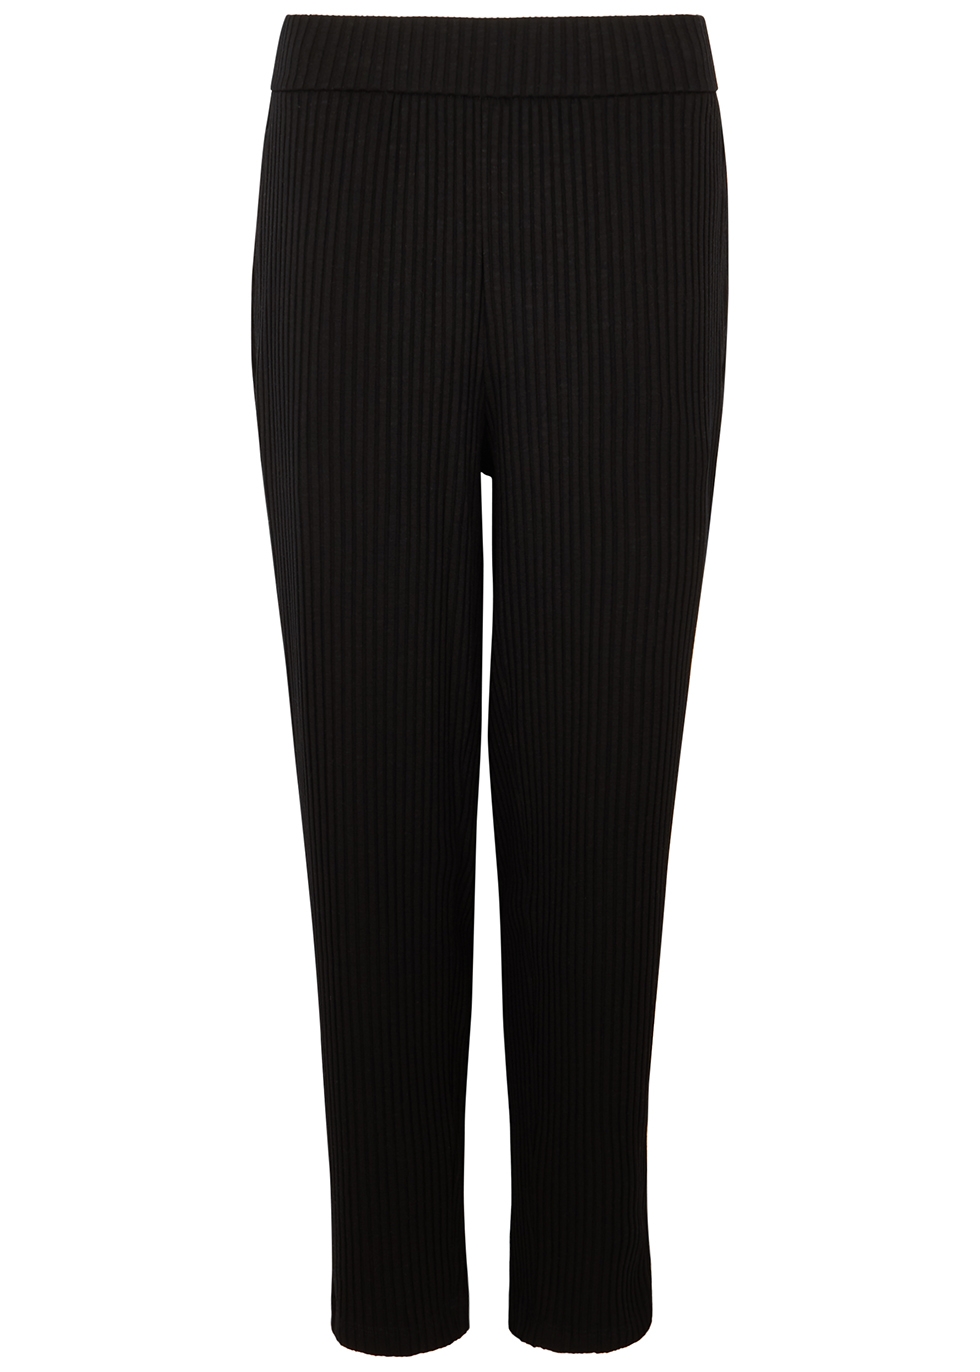 Black ribbed jersey trousers